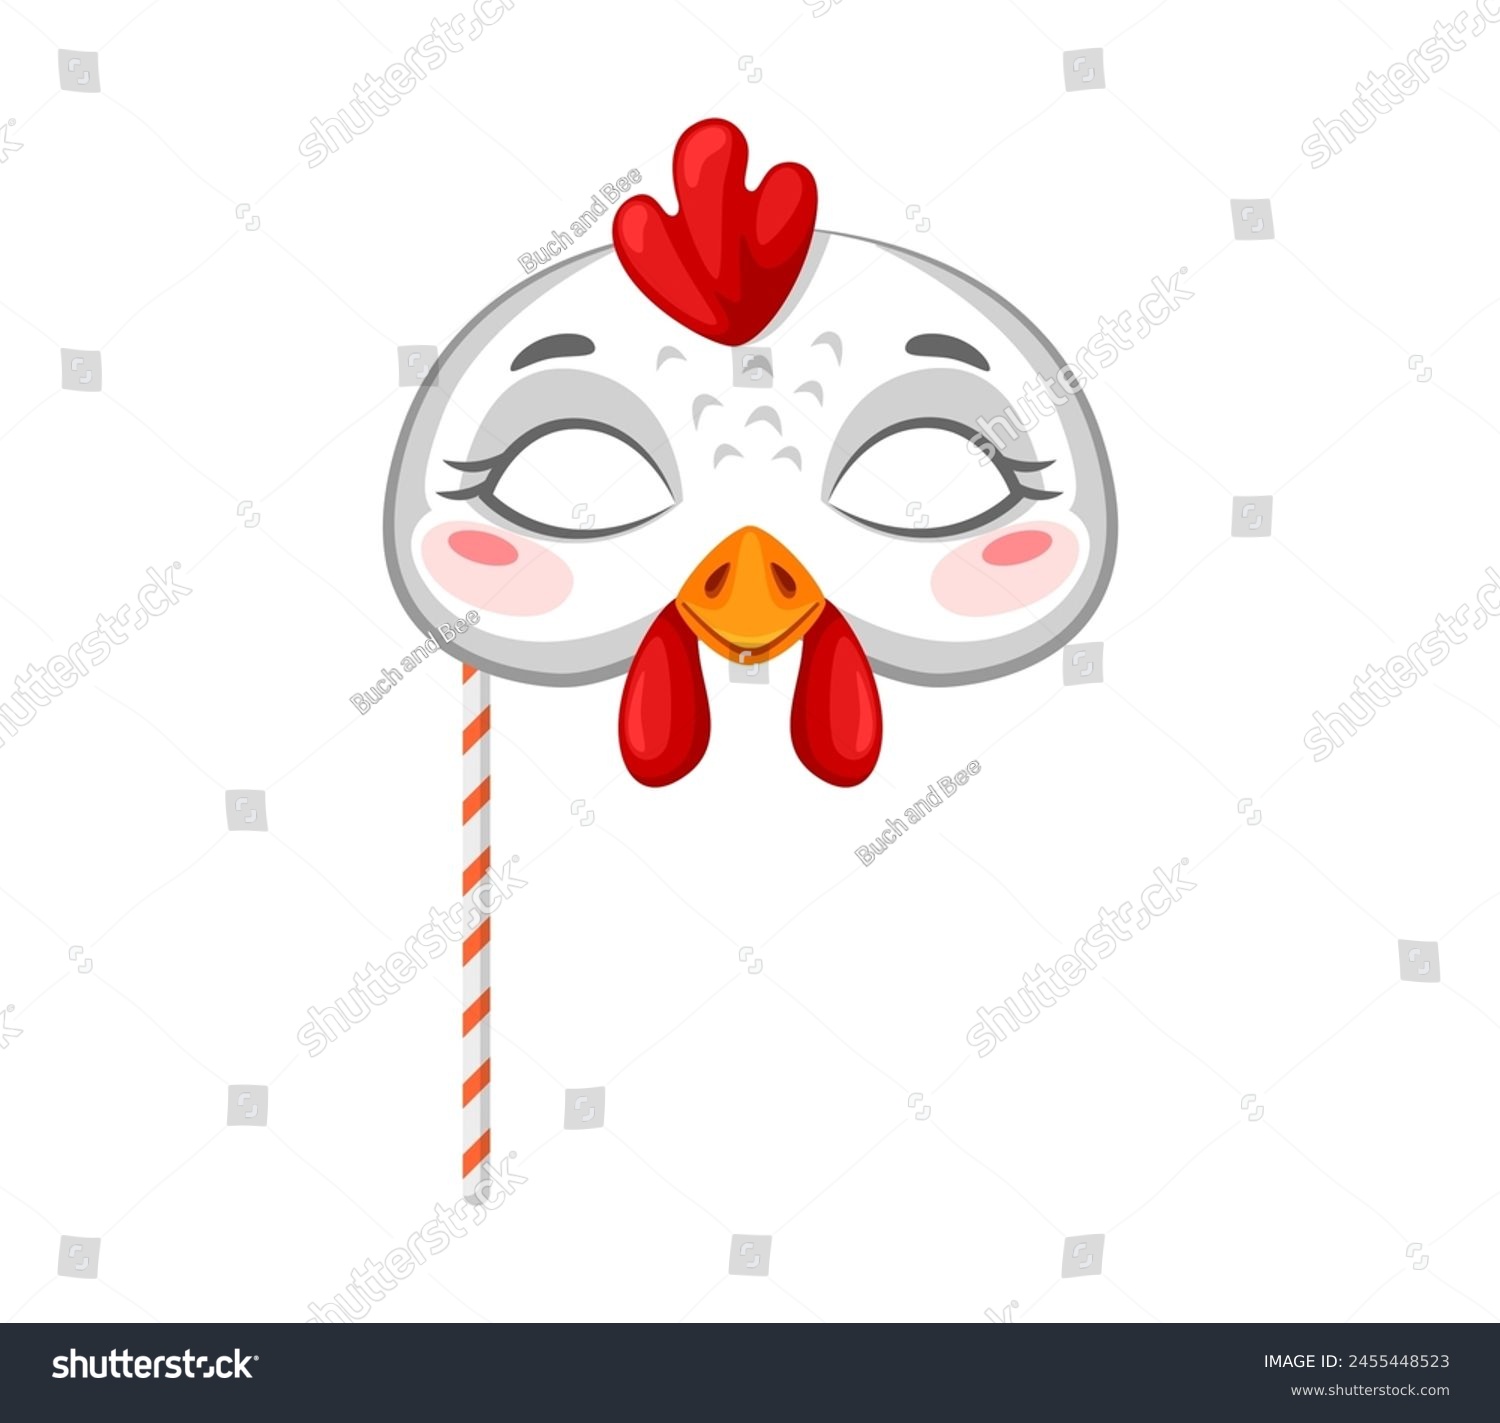 SVG of Rooster animal carnival party mask. Festival or birthday costume. Isolated vector funny chicken or cock farm bird face for Mardi Gras, photo booth, masquerade holiday event or new year celebration svg